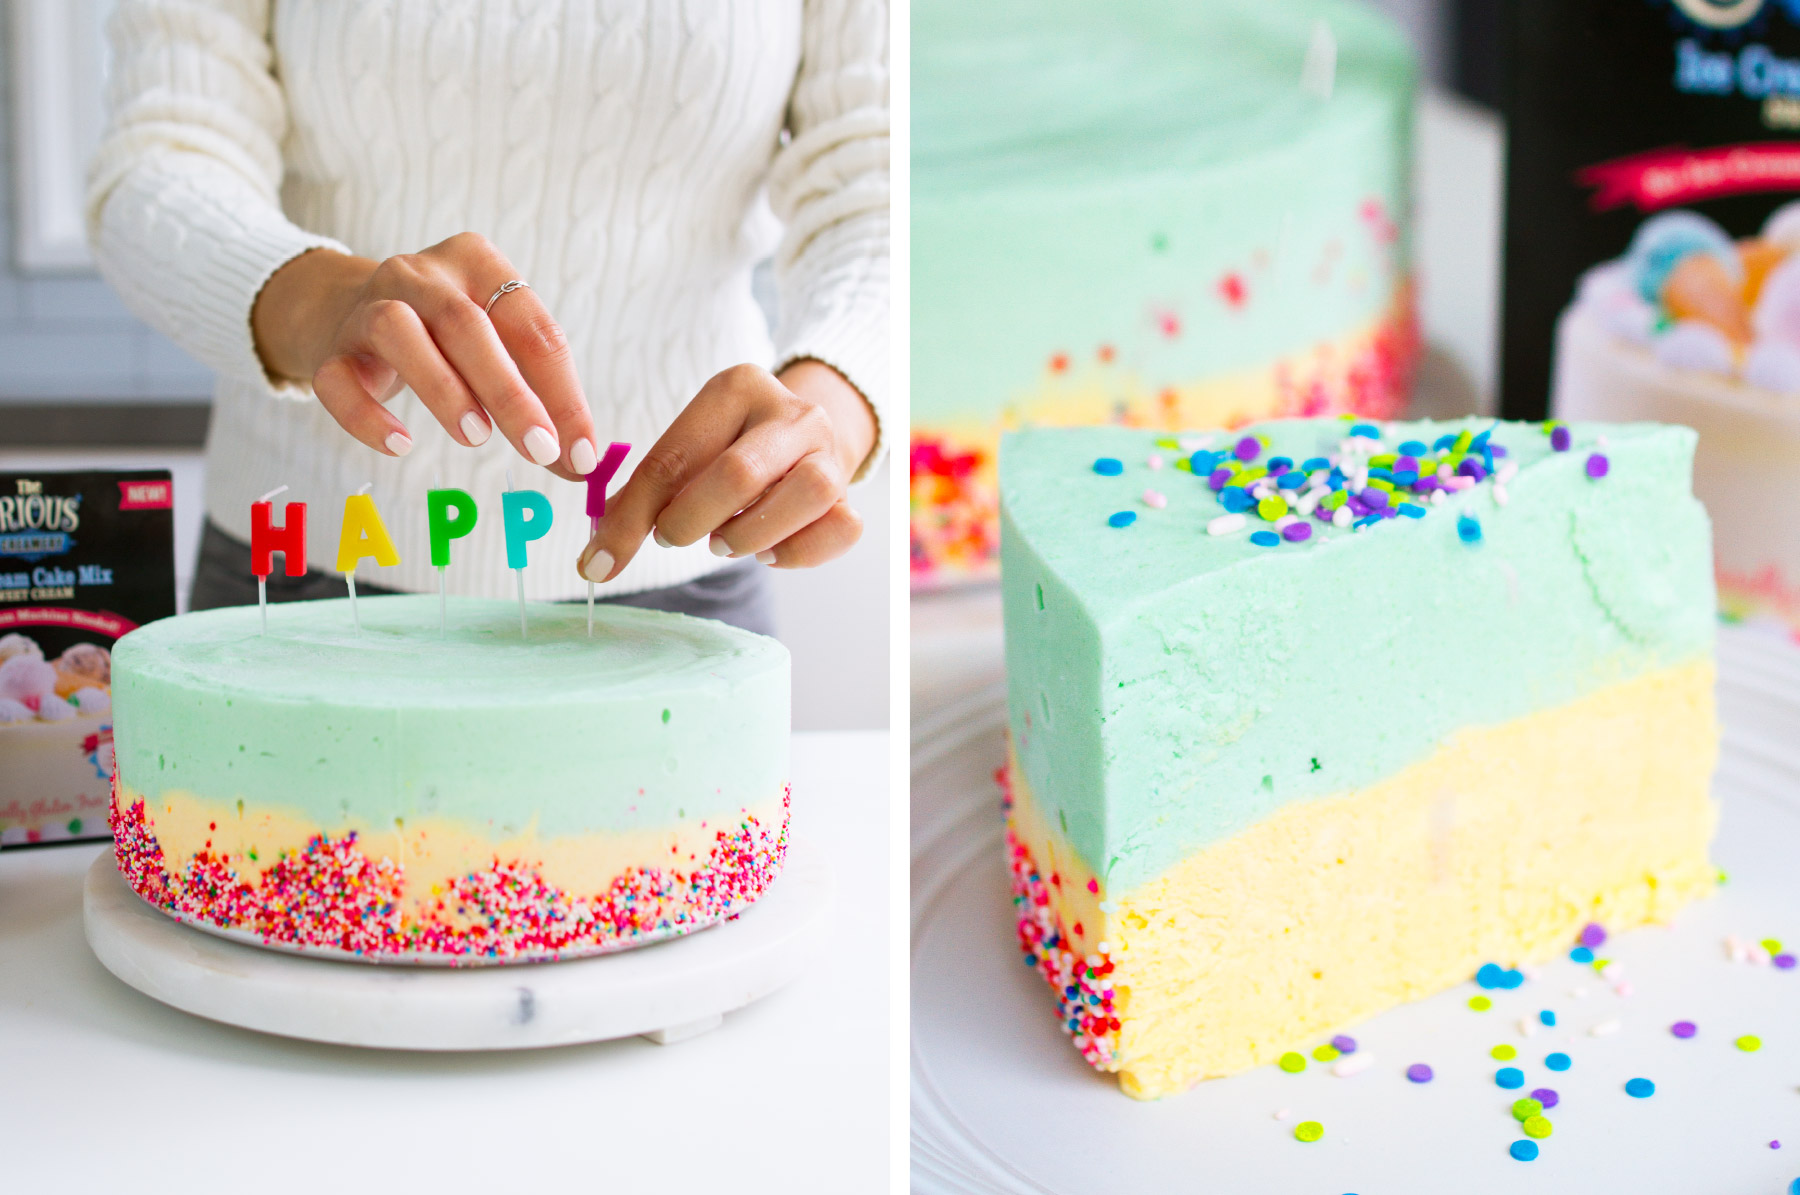 Fuze-Branding-Curious-Creamery-DIY-Ice-Cream-Layered-Birthday-Cake-With-Sprinkles-Fun-Happy-Candles-Lifestyle-Product-Photography-Styling